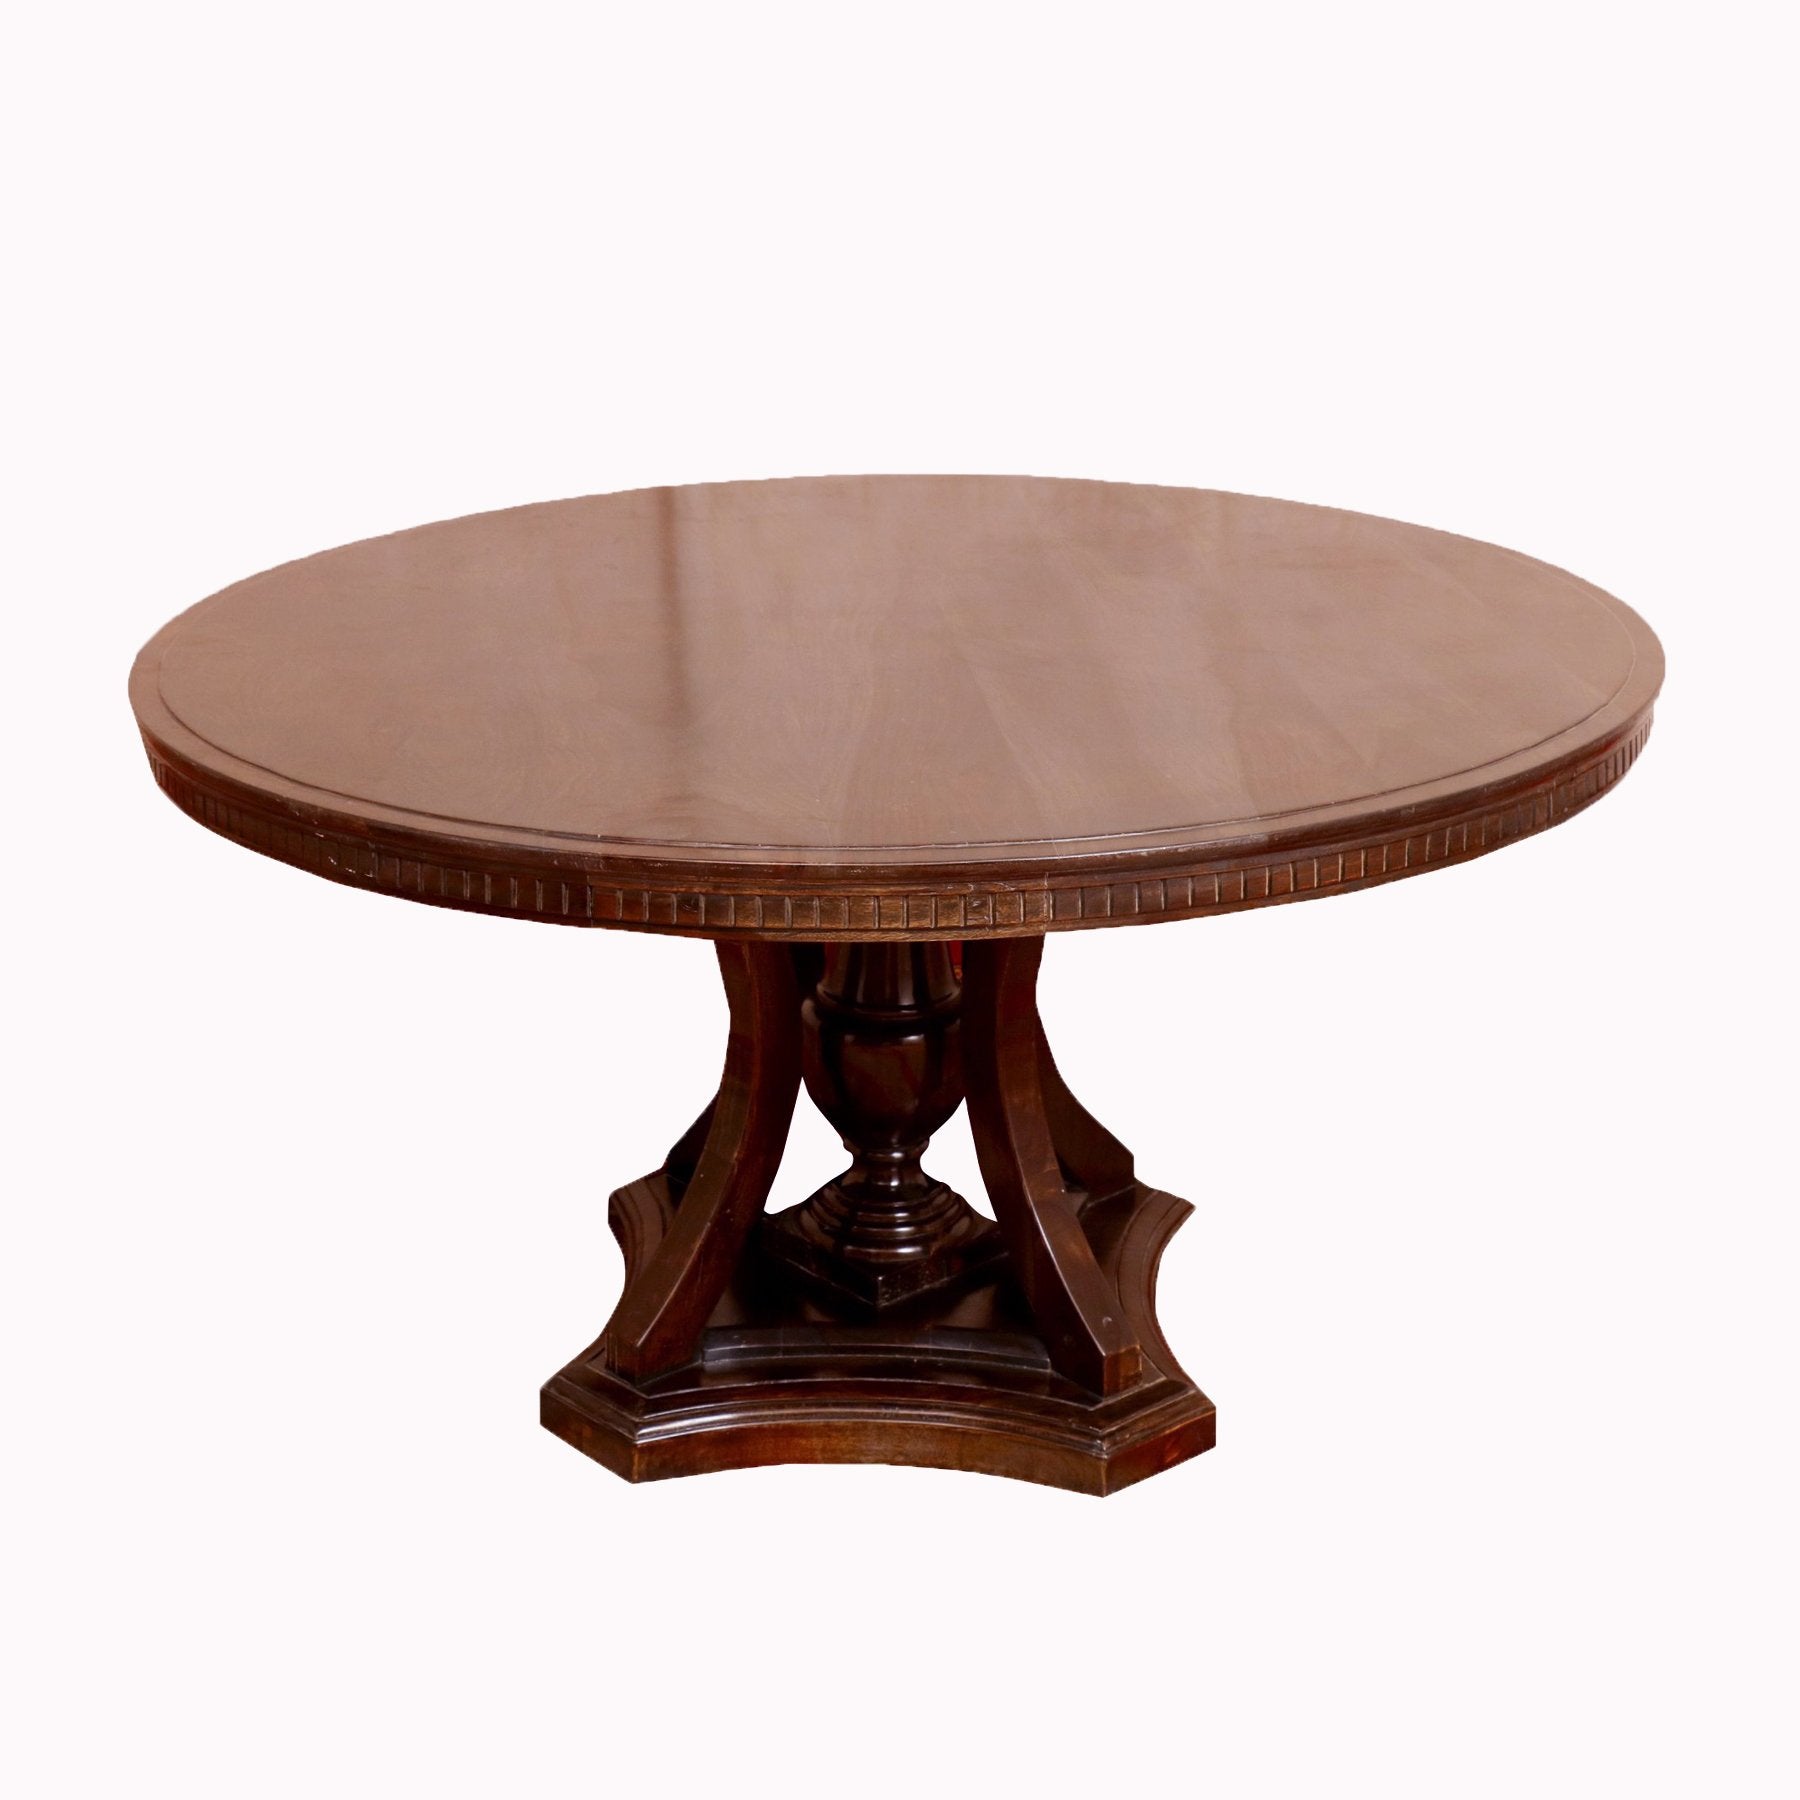 5 Tips to Keep Your Wooden Dining Table in Prime Condition